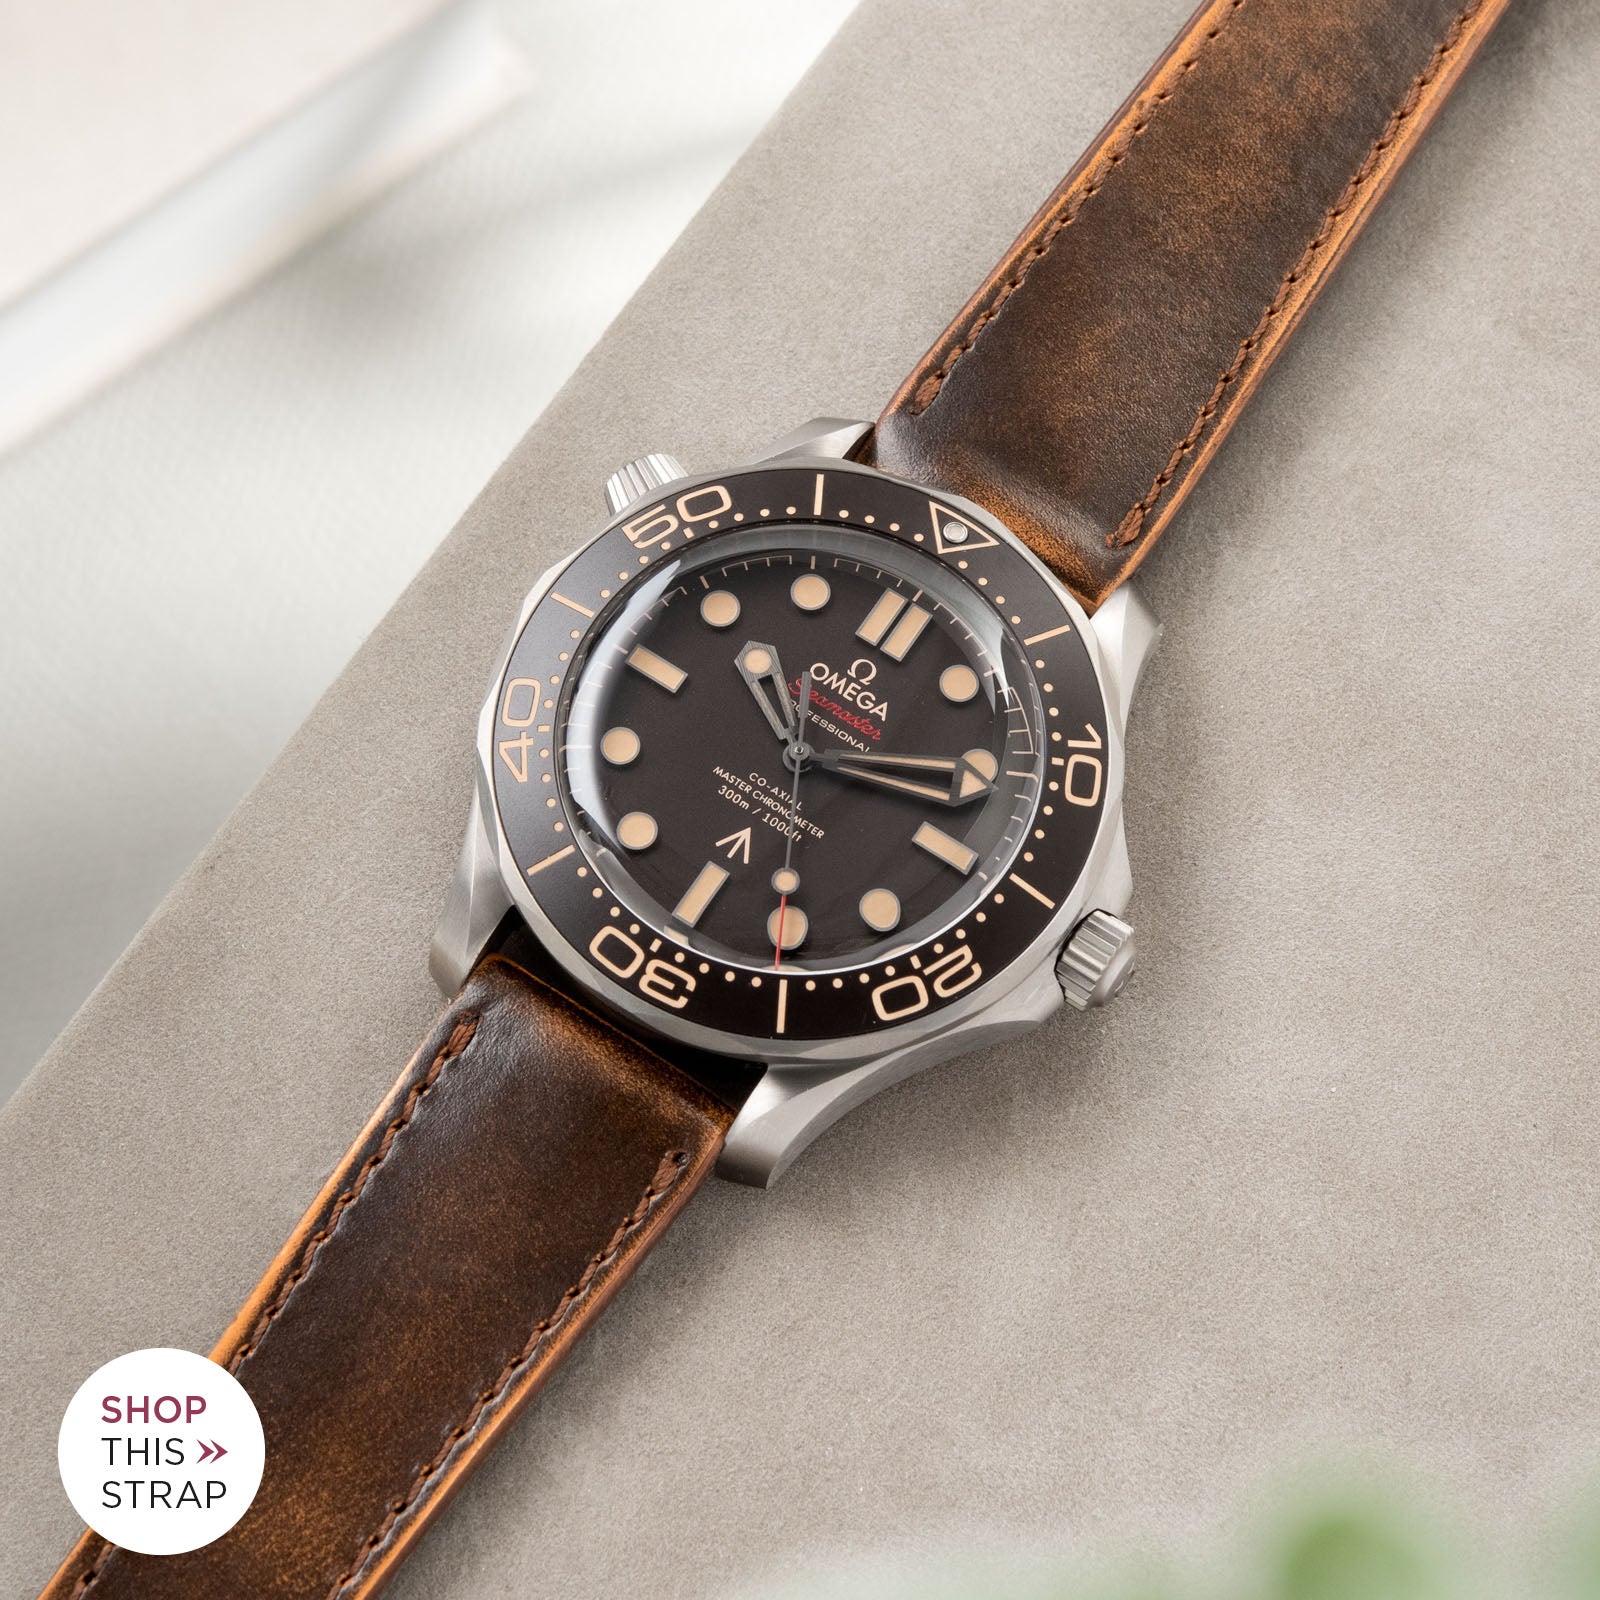 Bulang and Sons_Strap Guide_The Omega Seamaster James Bond_Degrade Honey Brown Leather Watch Strap